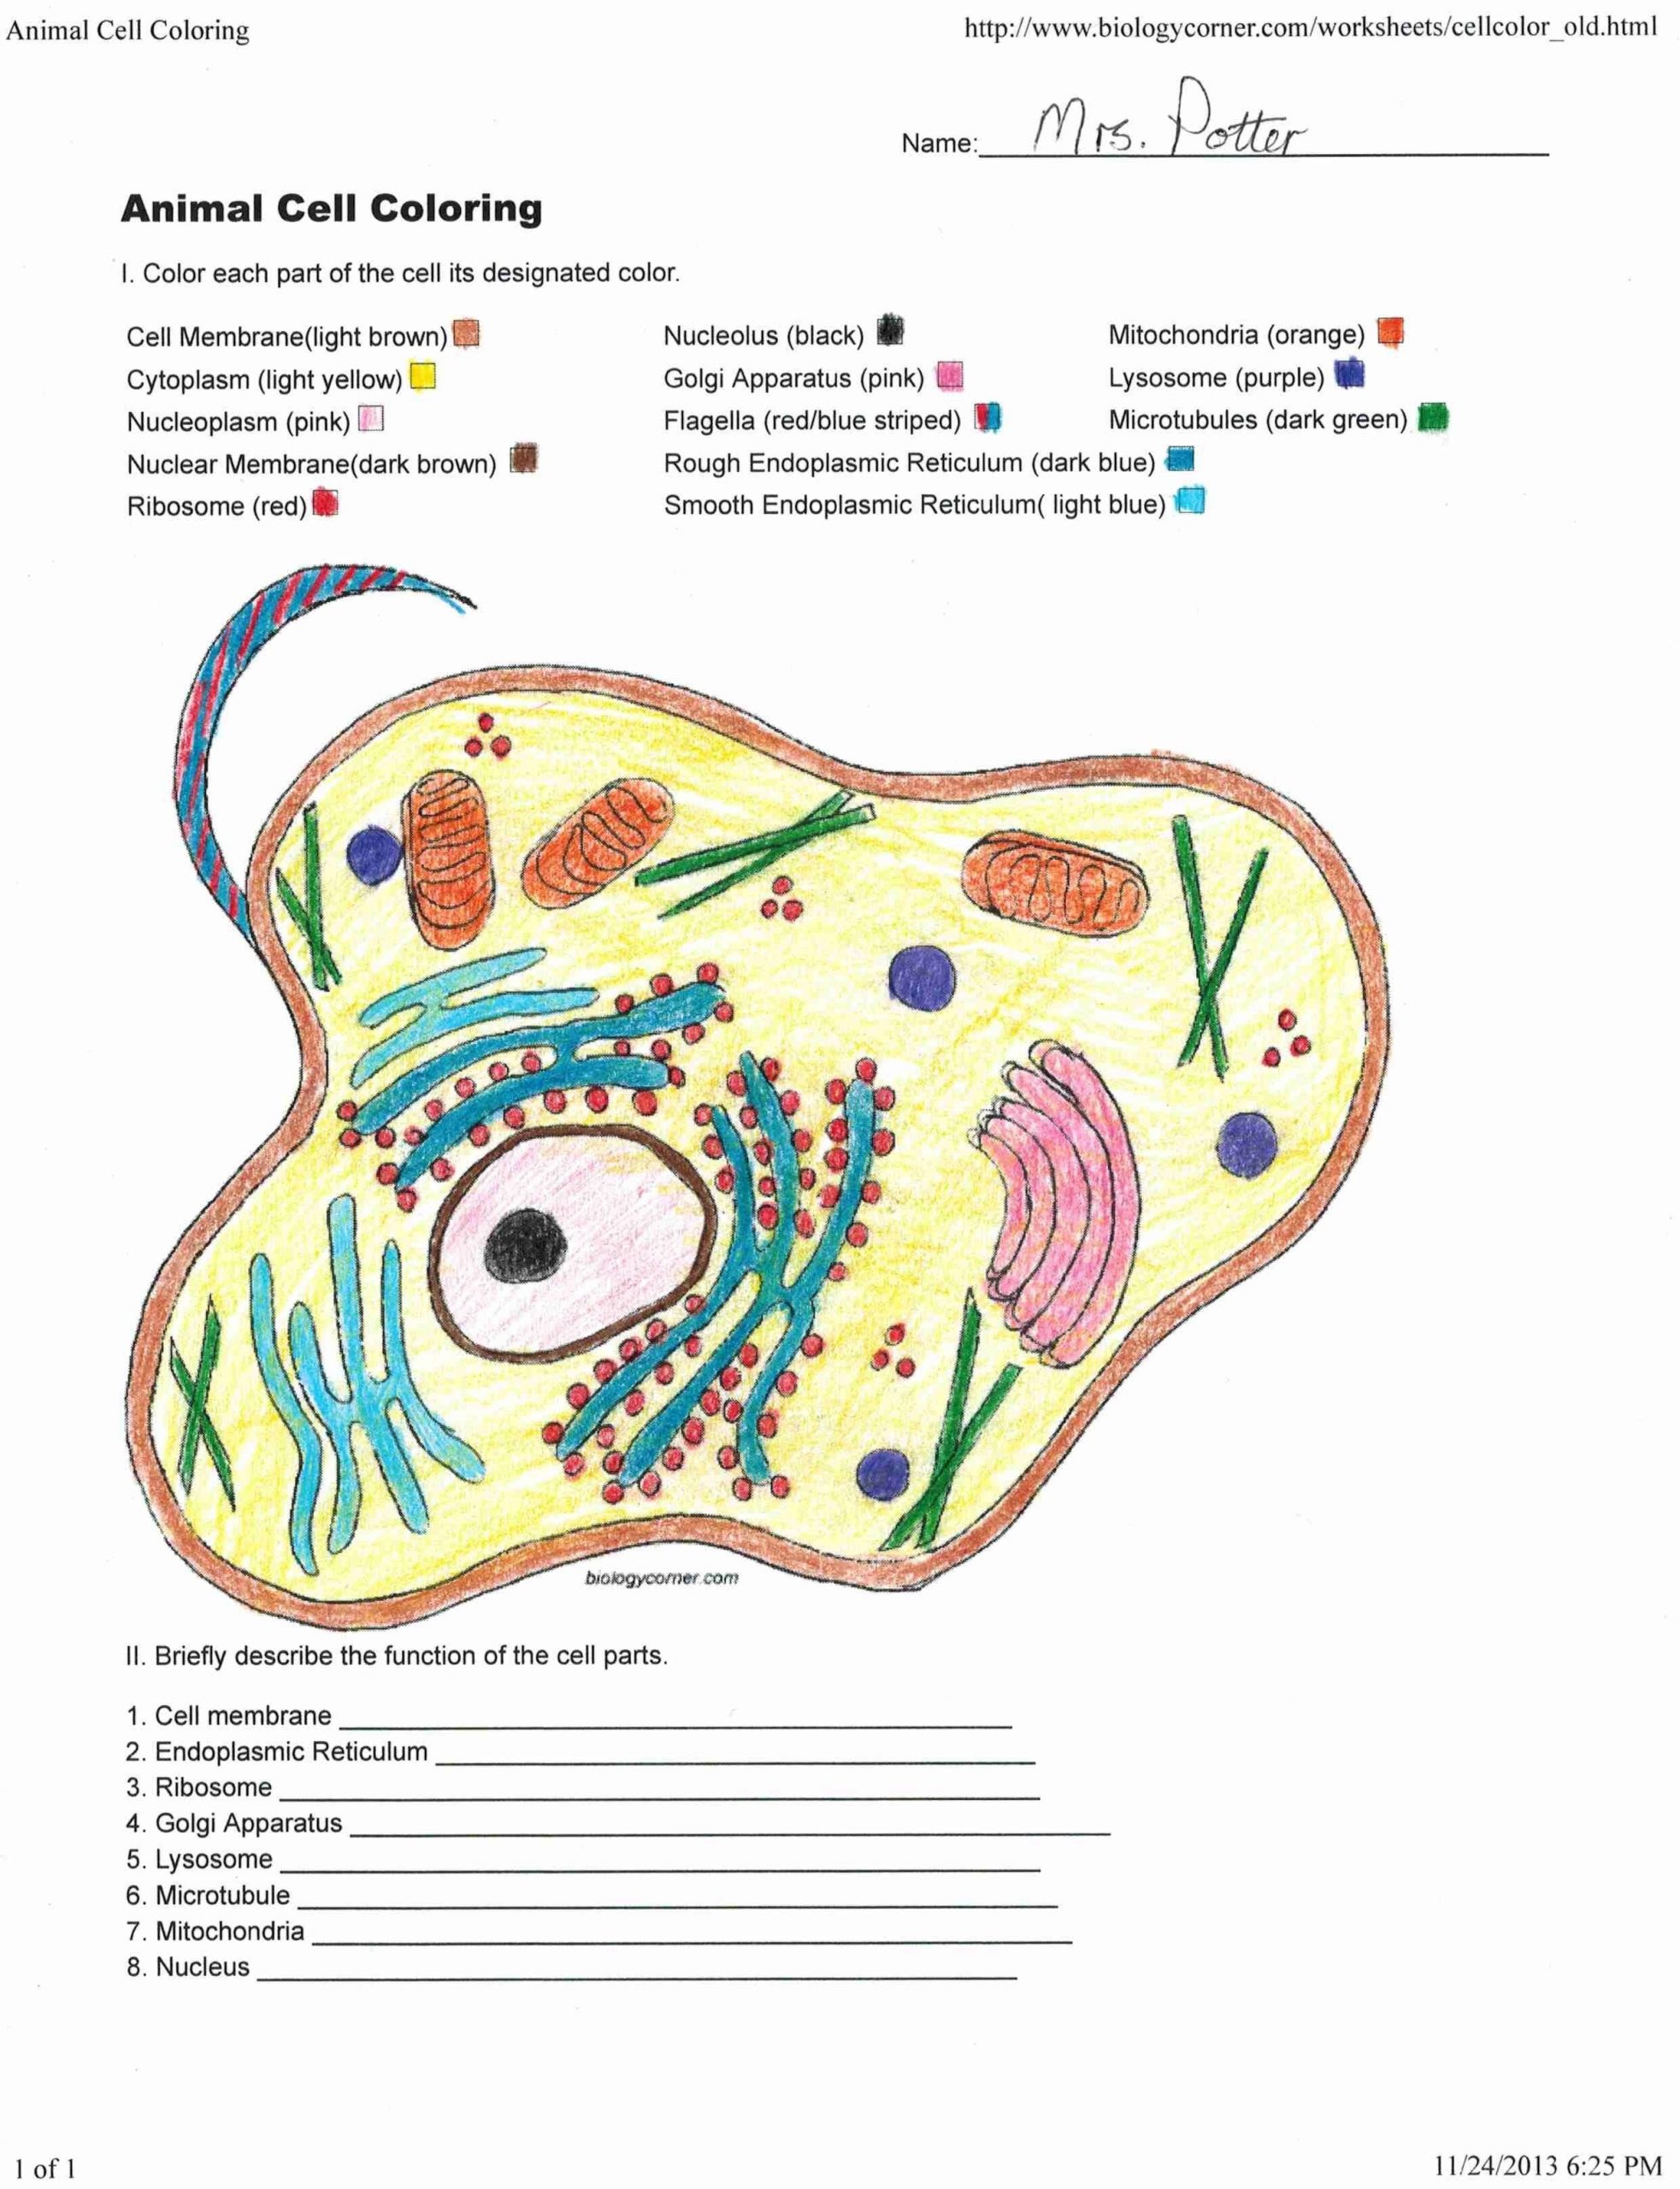 Animal Cell Worksheet Answers Animal Cell Coloring Answers